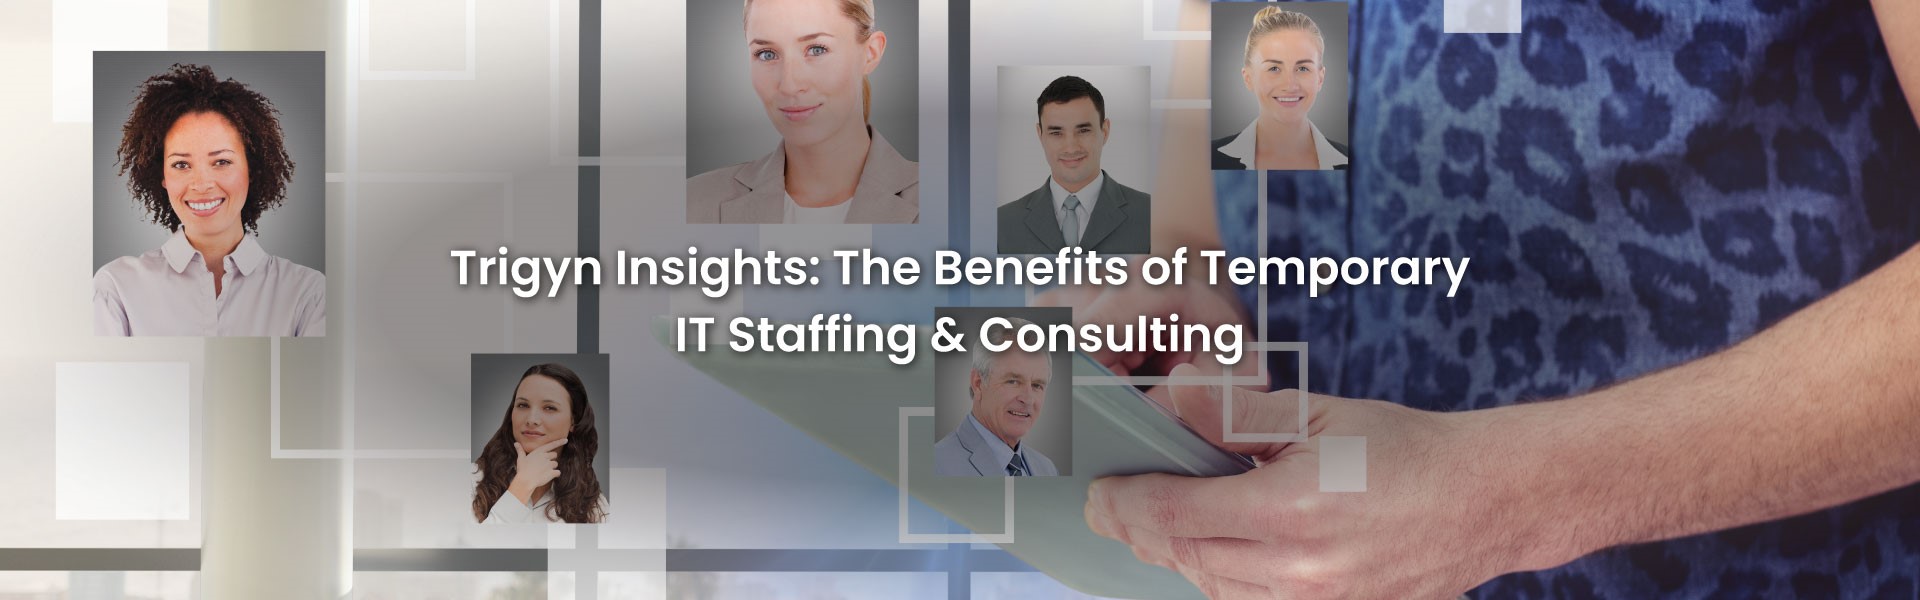 IT Staffing & Consulting